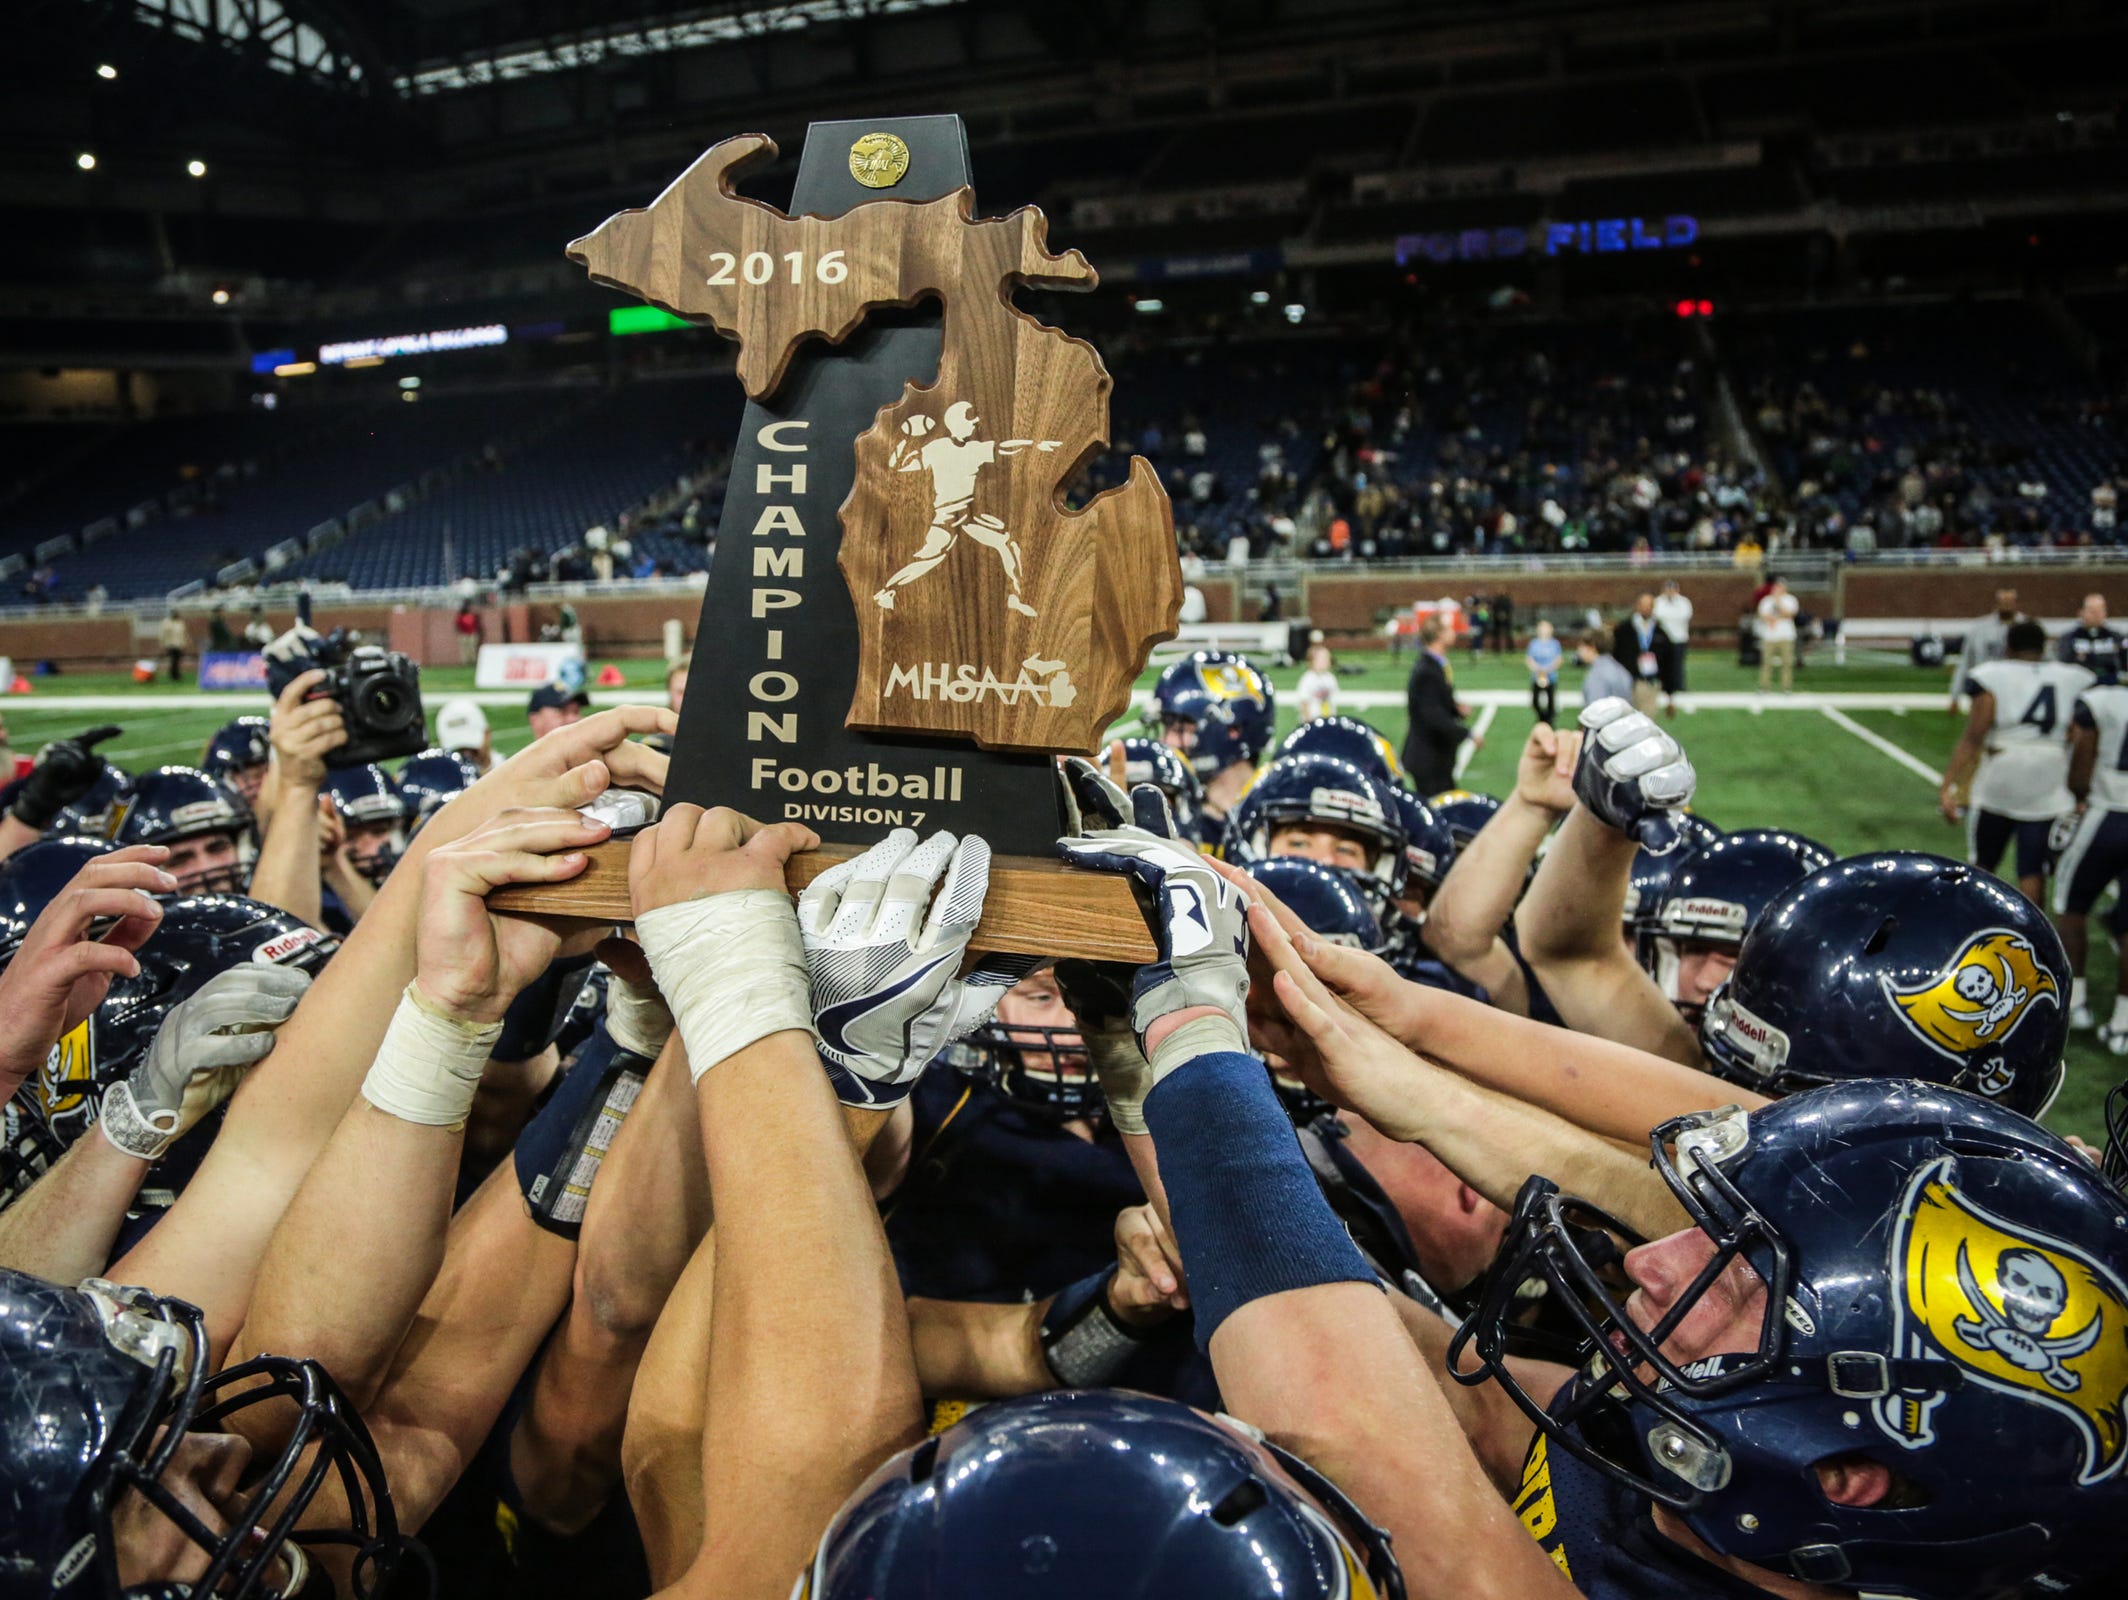 Pewamo-Westphalia's players celebrate winning the Division 7 high school title against Detroit Loyola on Saturday Nov. 26, 2016, at Ford Field in Detroit.